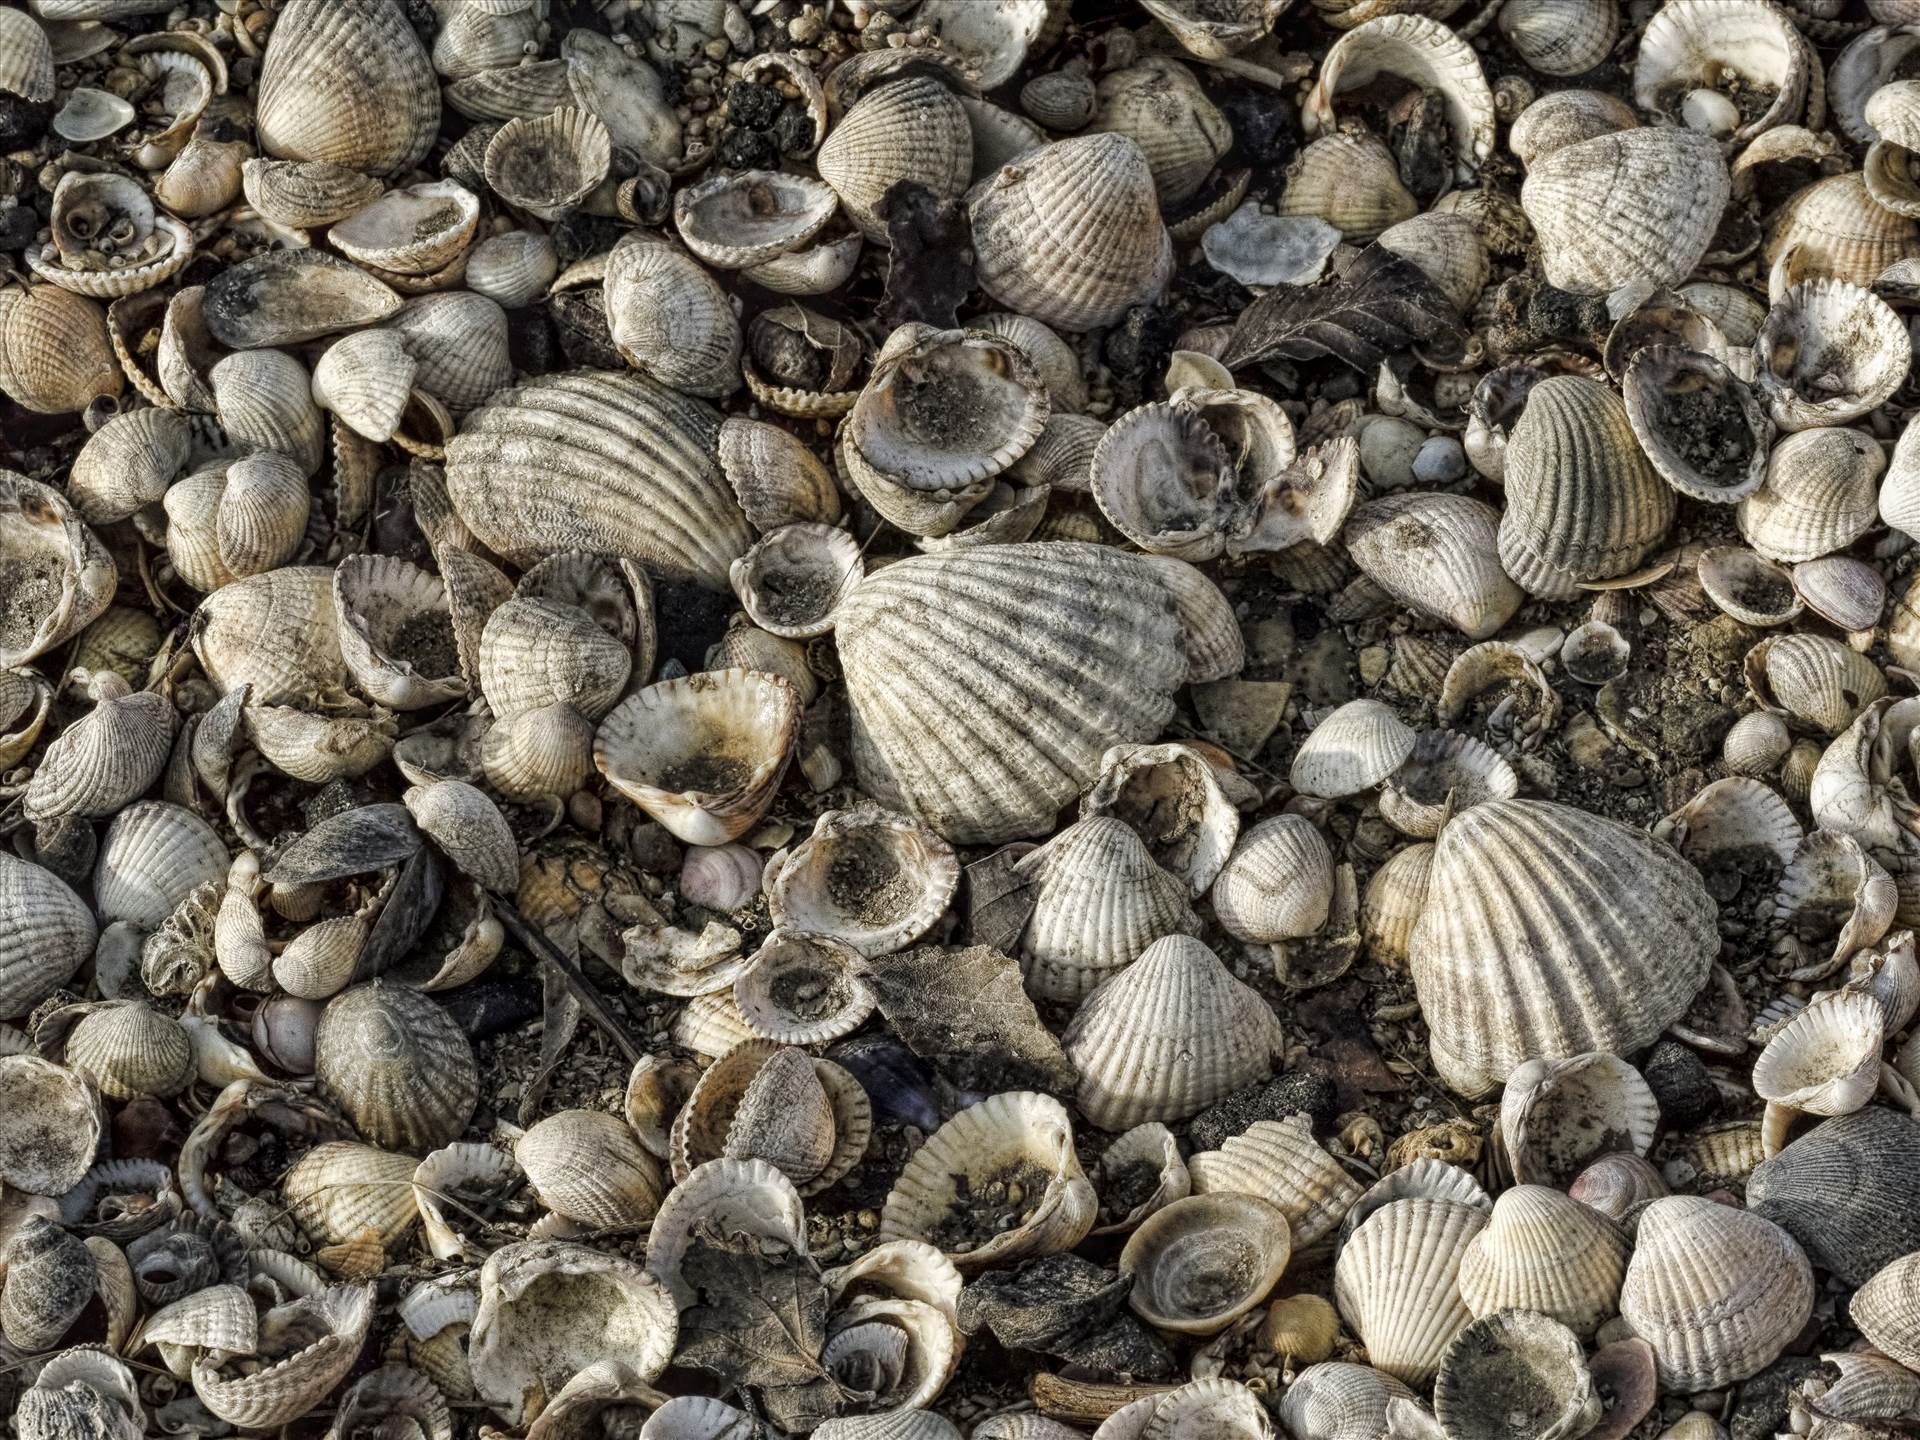 shells.jpg undefined by WPC-208